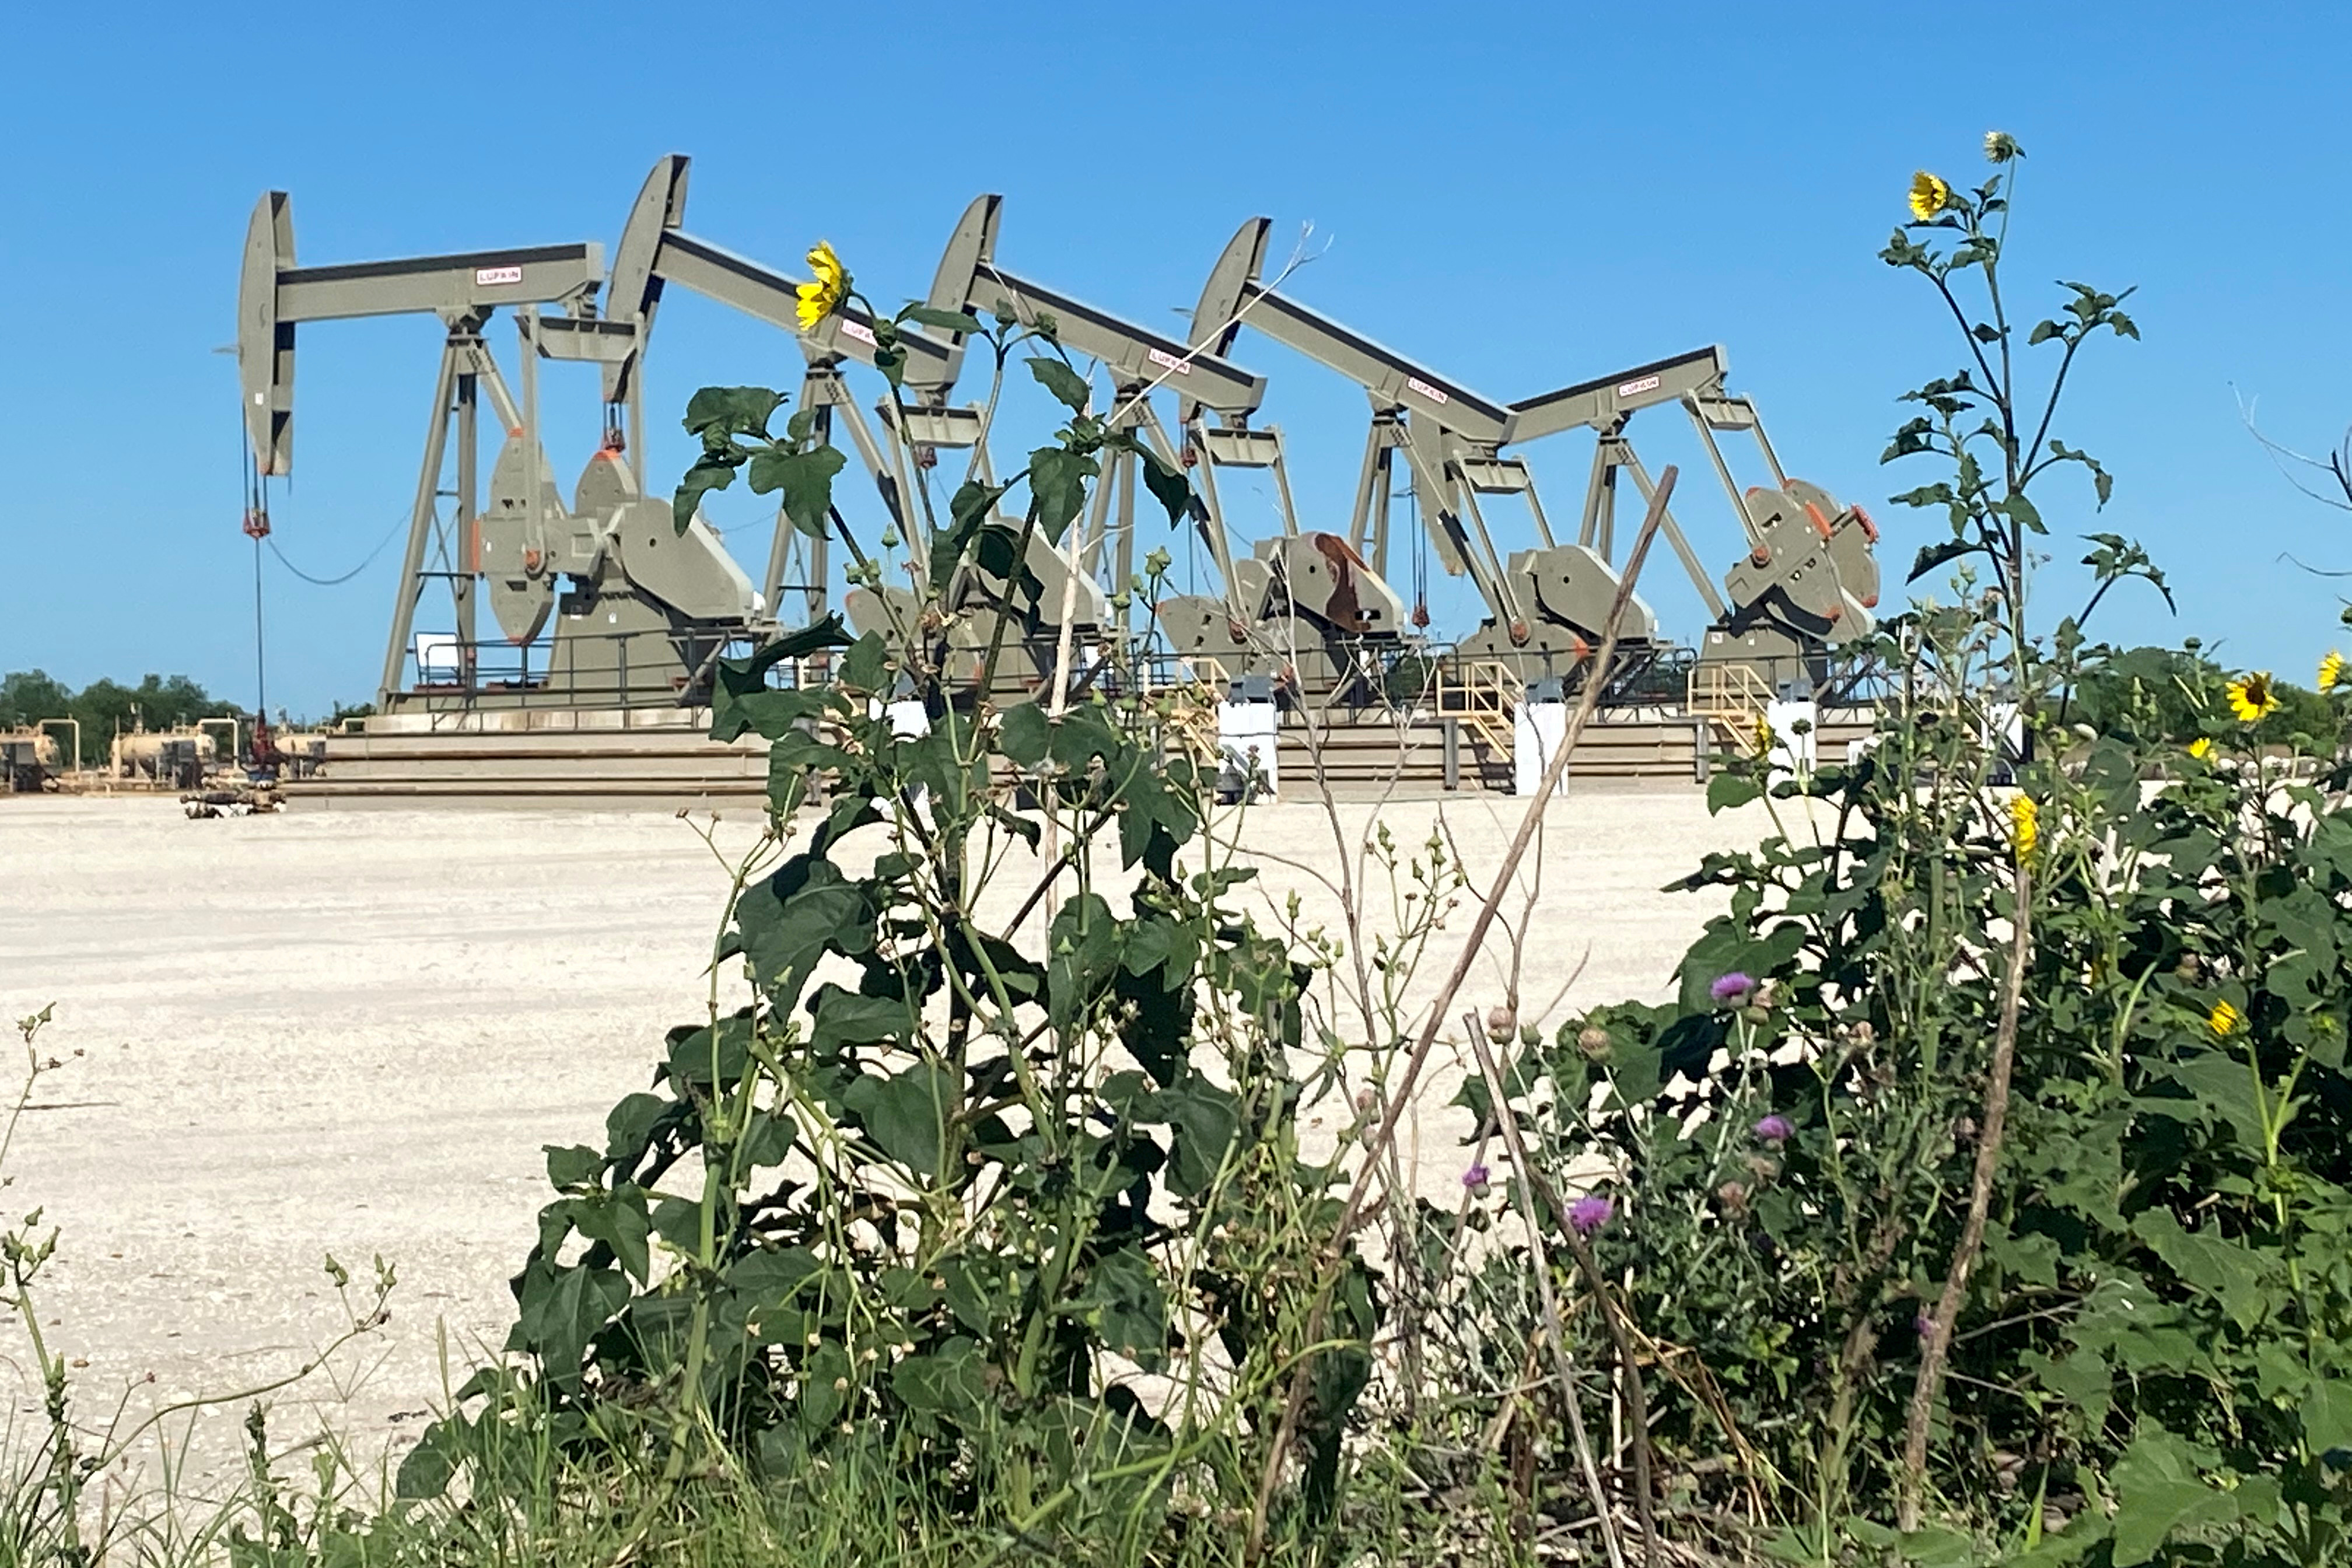 A Marathon Oil well site at the Eagle Ford Shale oilfield in Texas